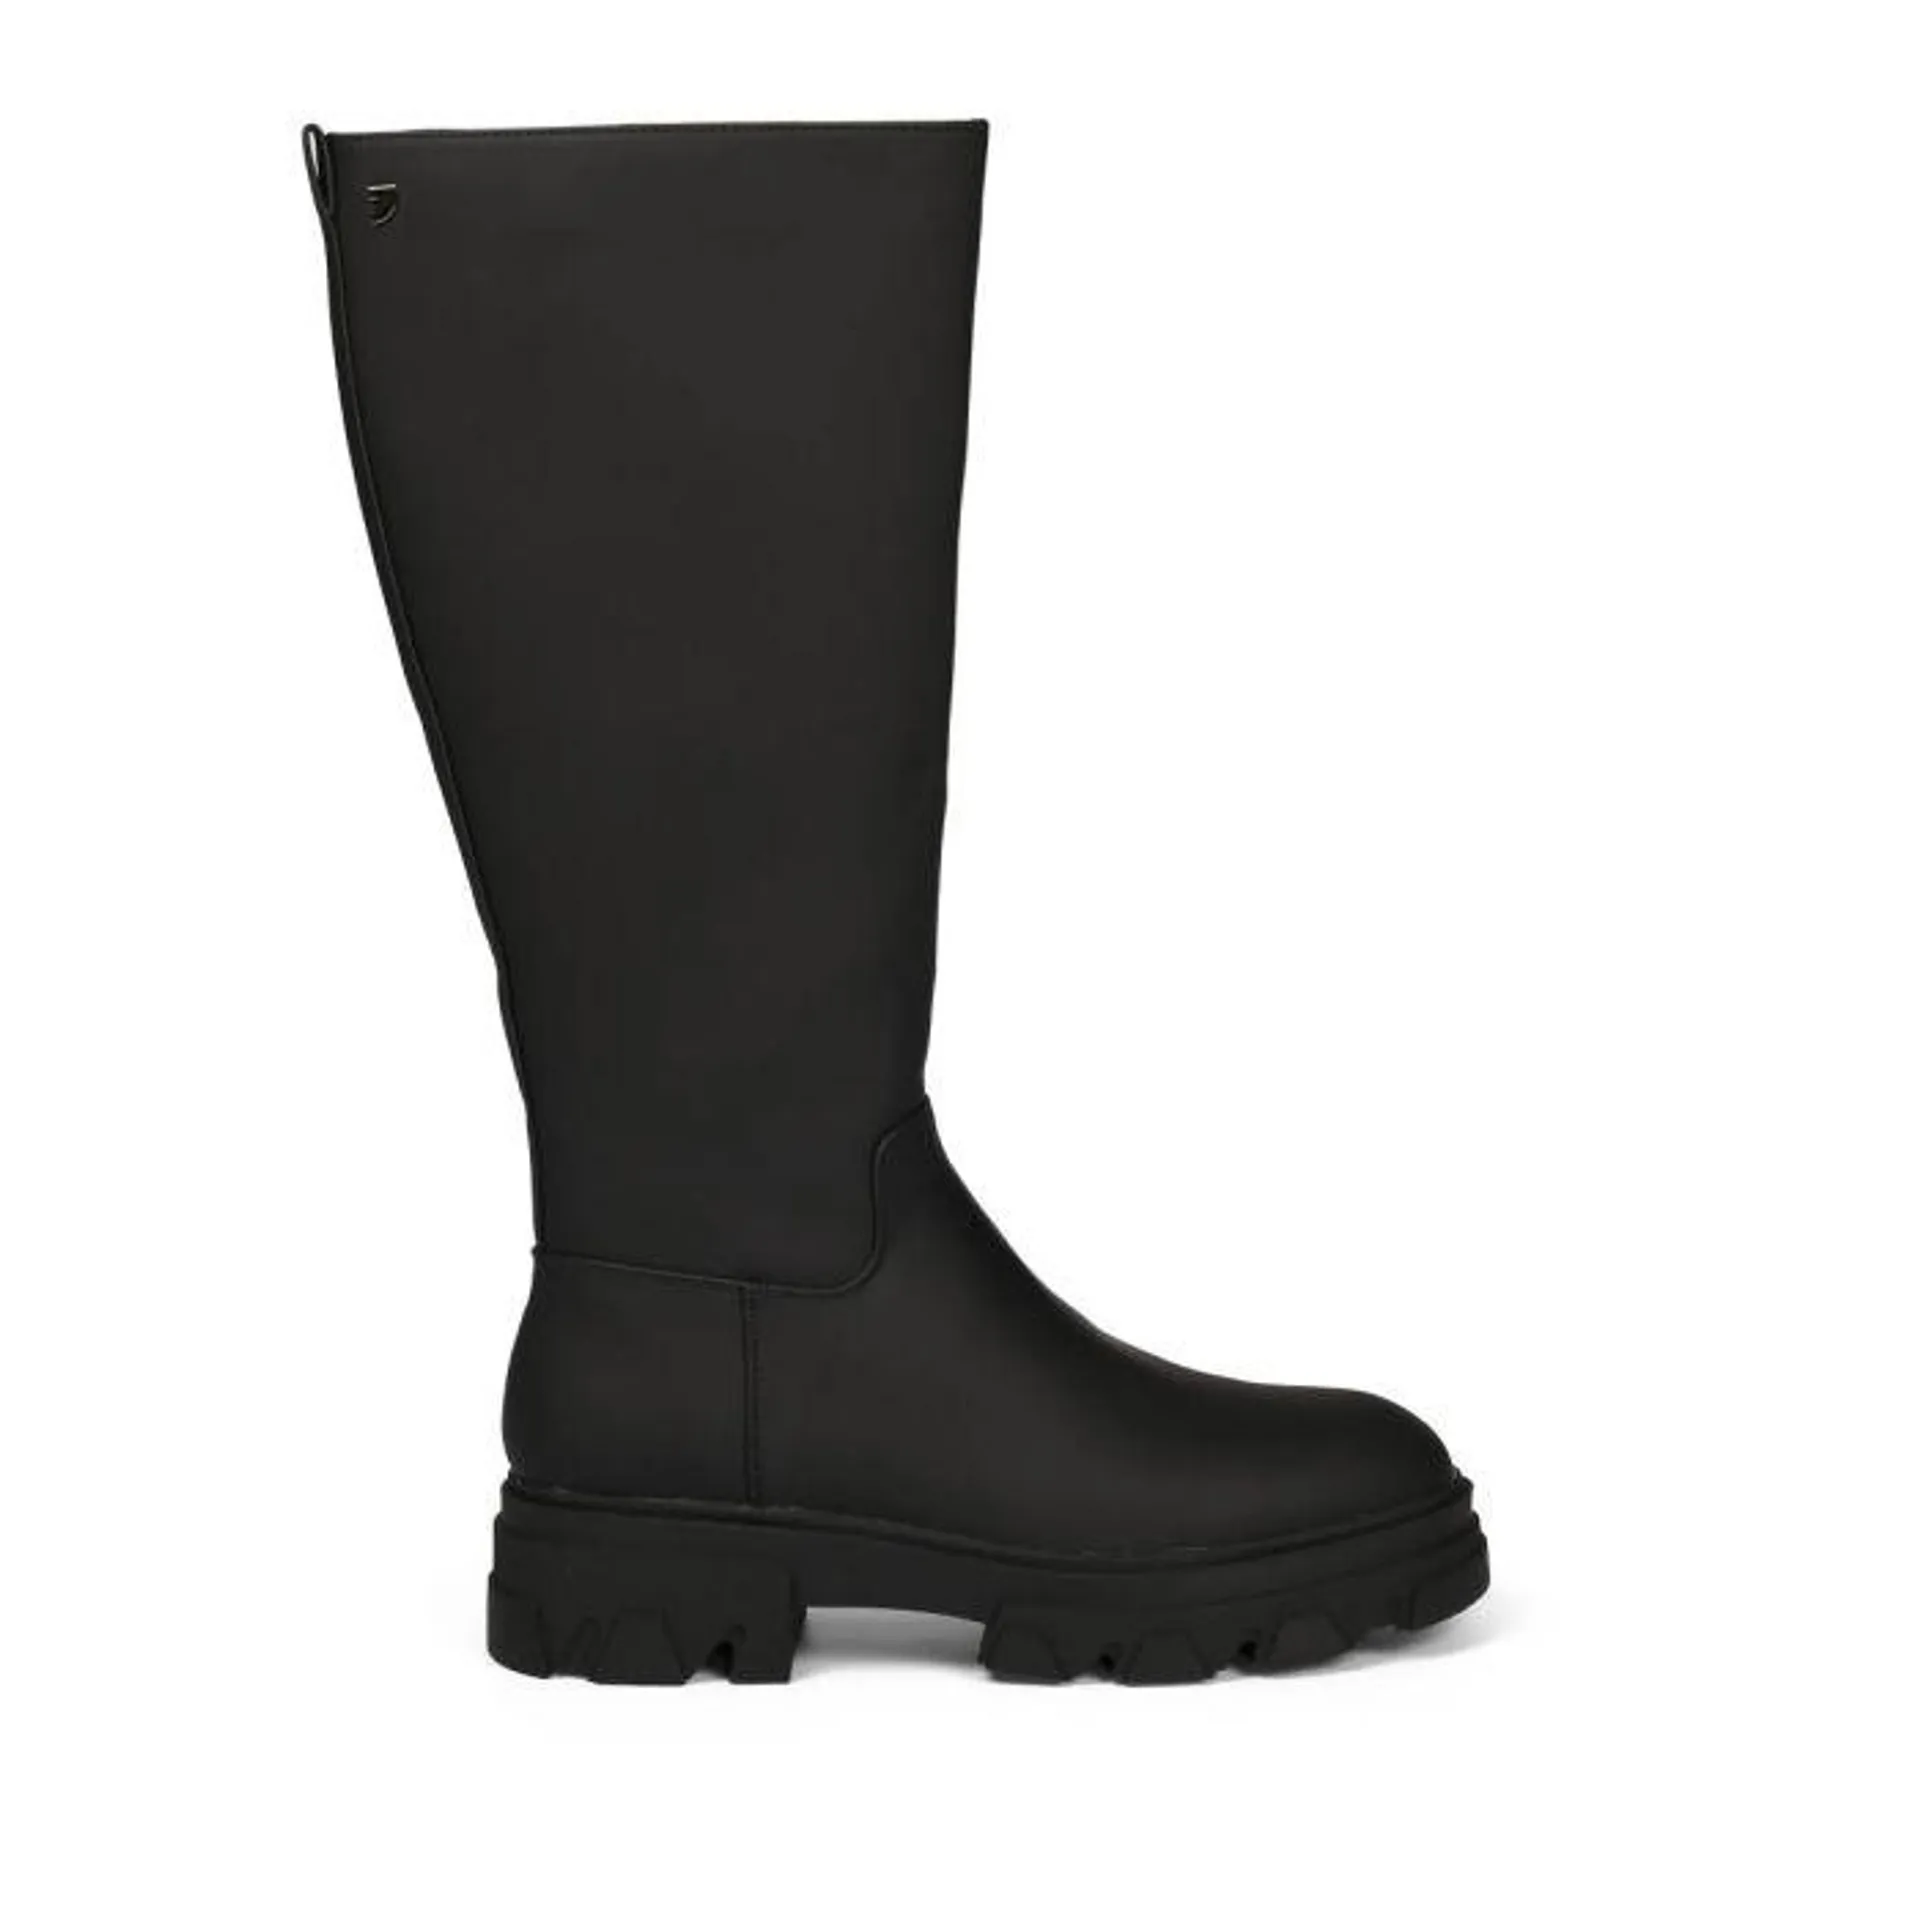 Brossard women's black rubberised knee-high boots with track soles